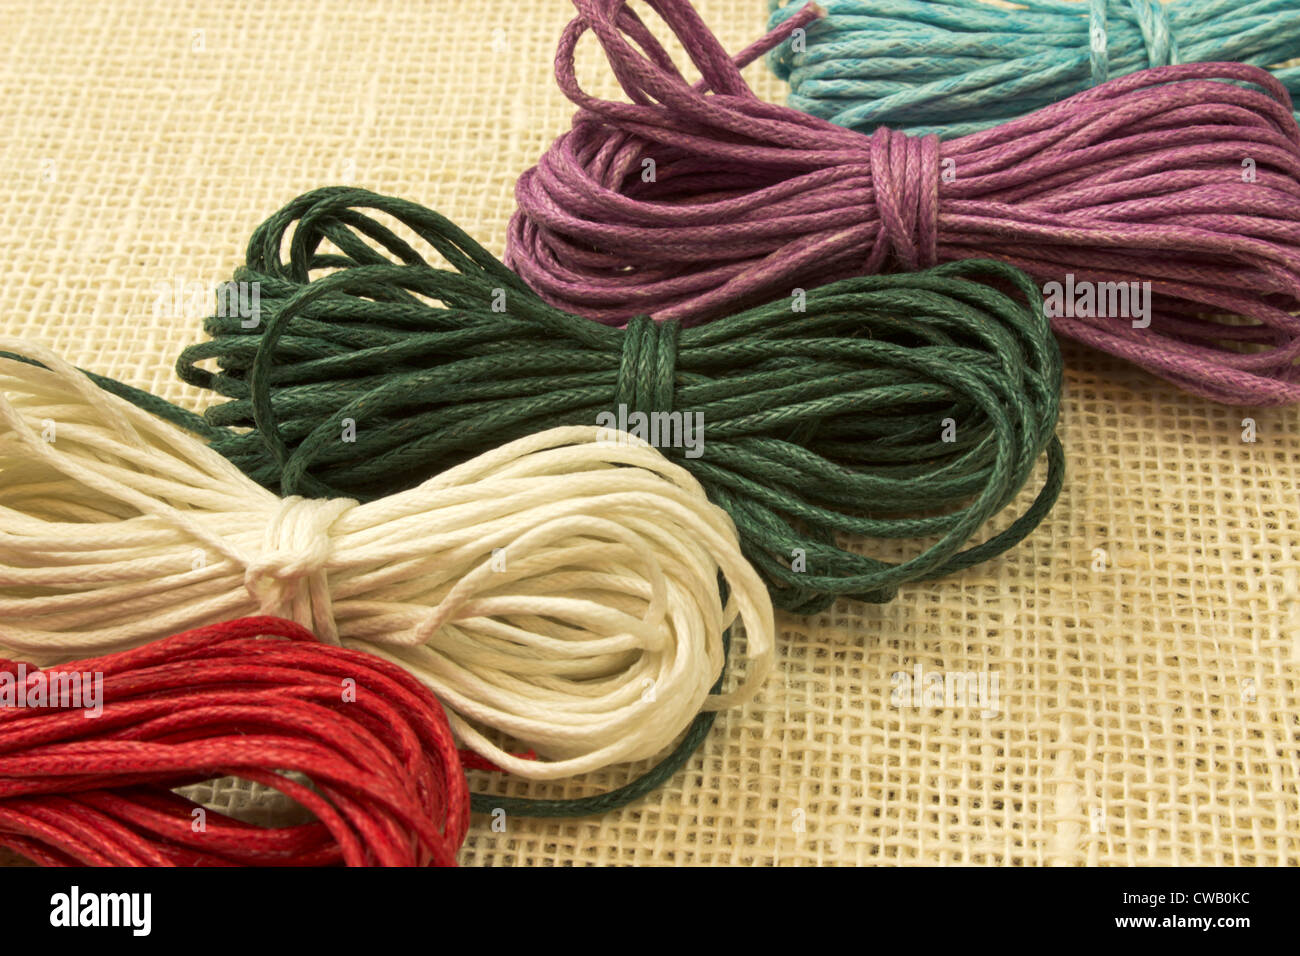 fine image of ropes with five different colors Stock Photo